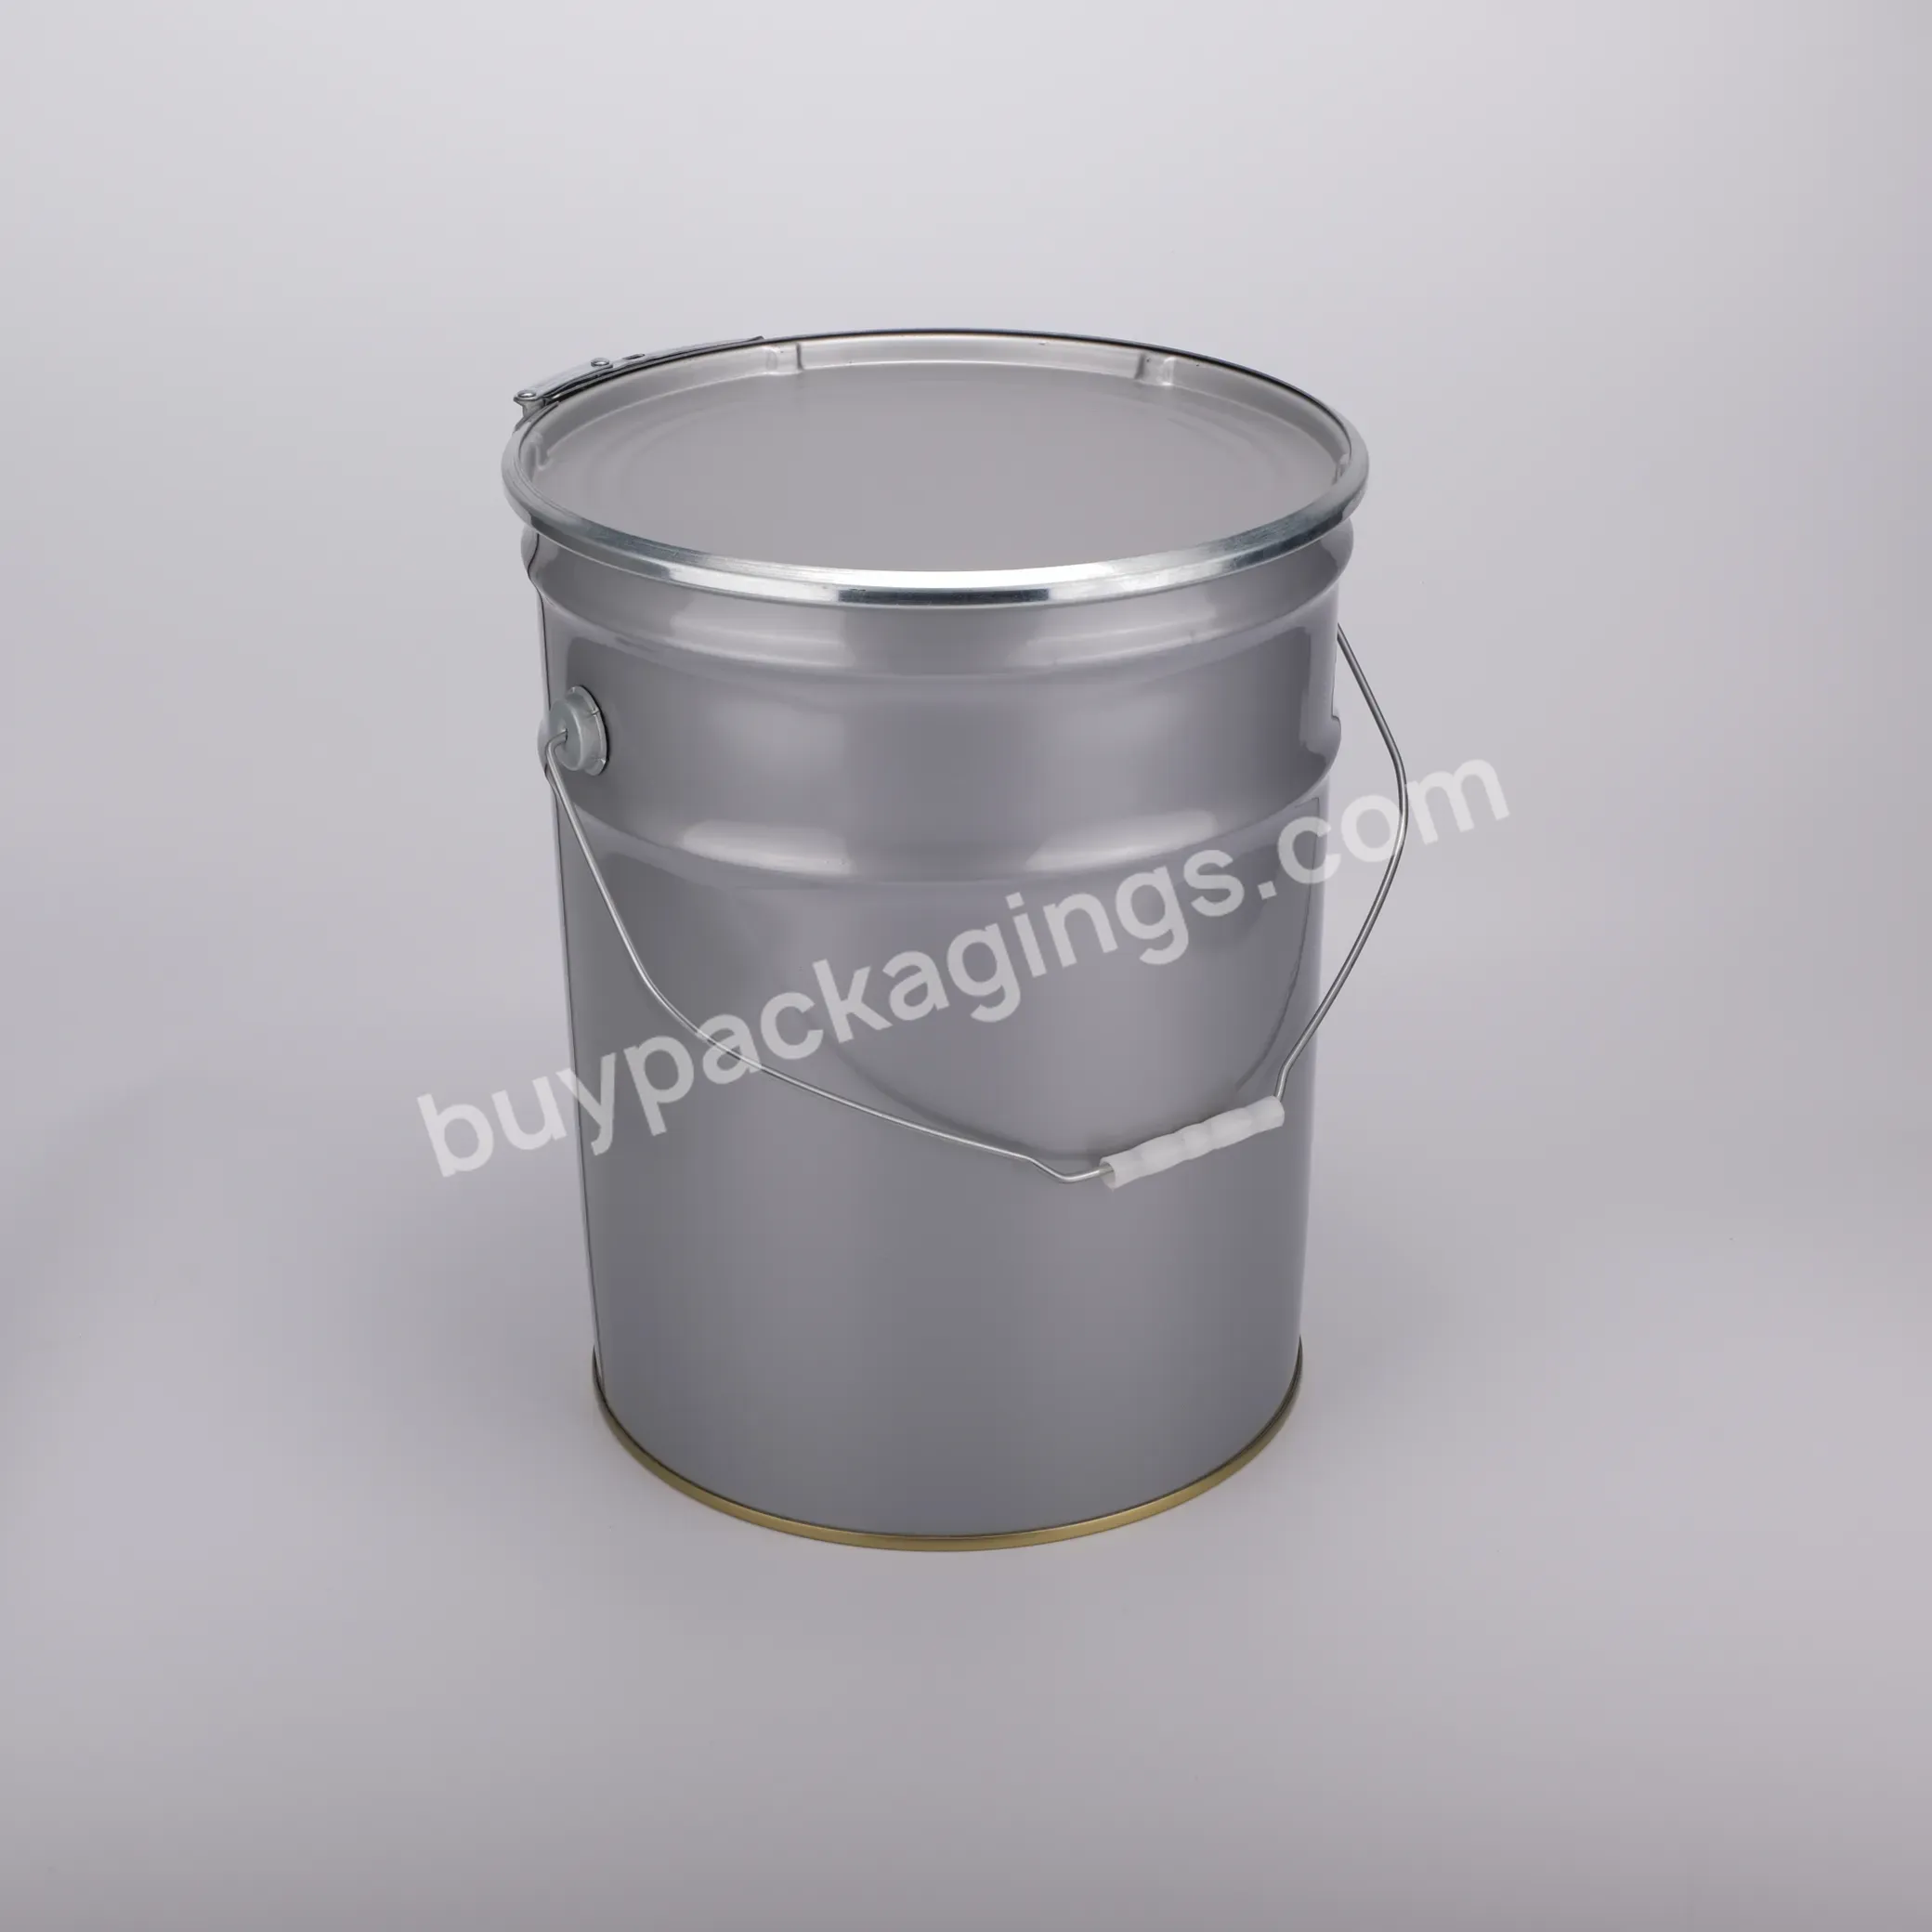 The New 50l Customizable And Printable Round Steel Drum Can Be Used As Fuel Tank - Buy 50l Steel Drum,Large Capacity Oil Drum,Round Steel Drum.